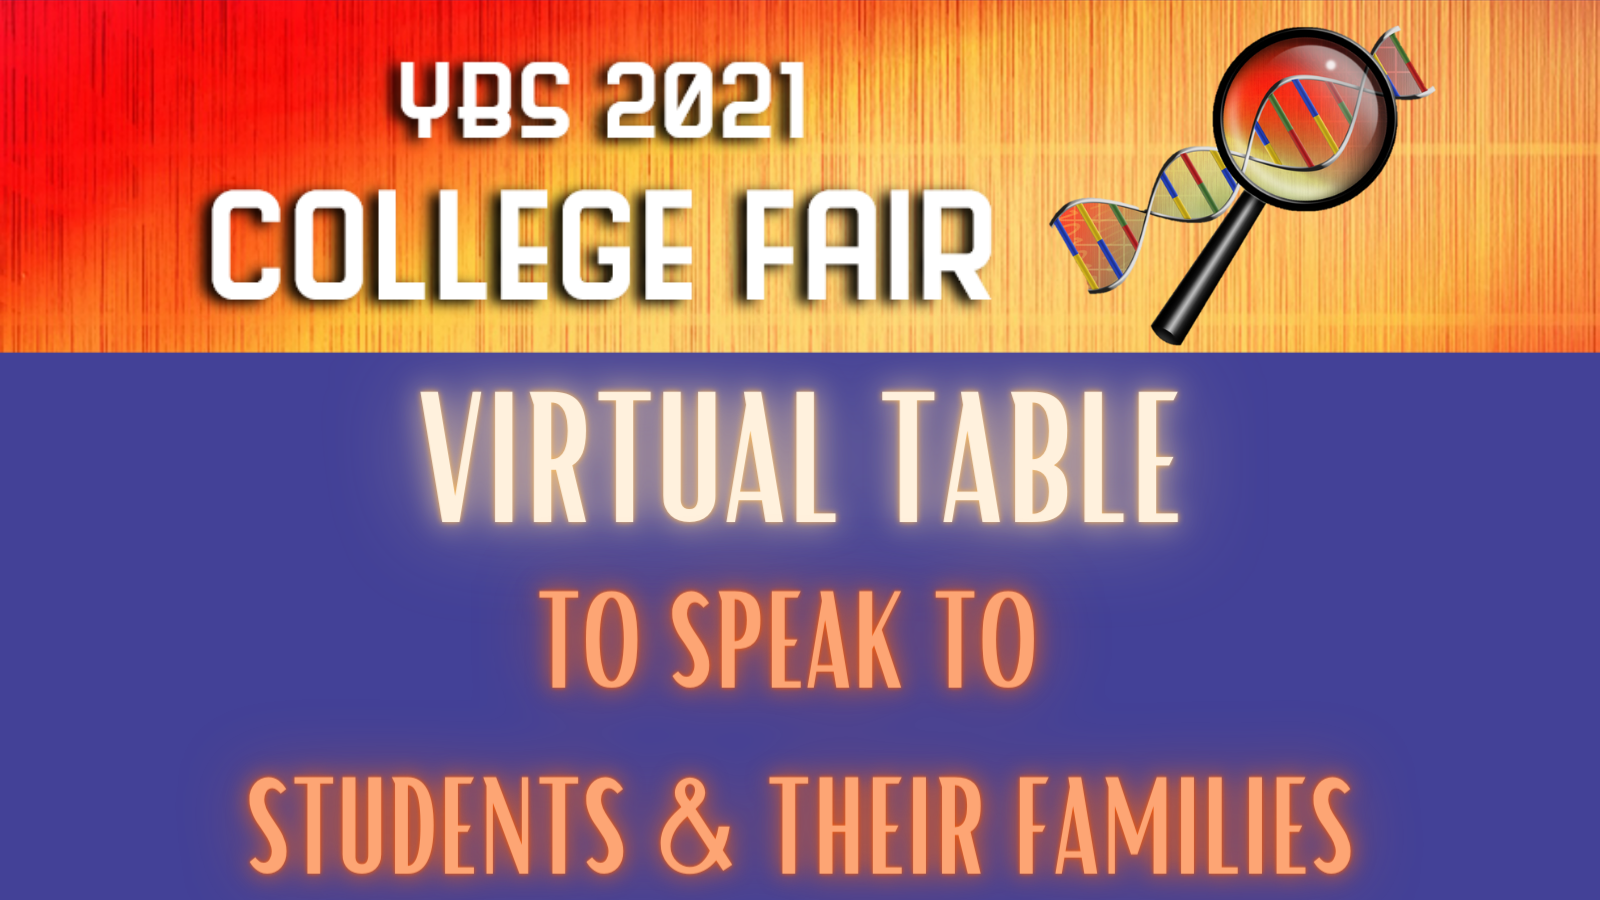 YBS 2021, May 23, 2021, Virtual Table to Speak to Students and Families